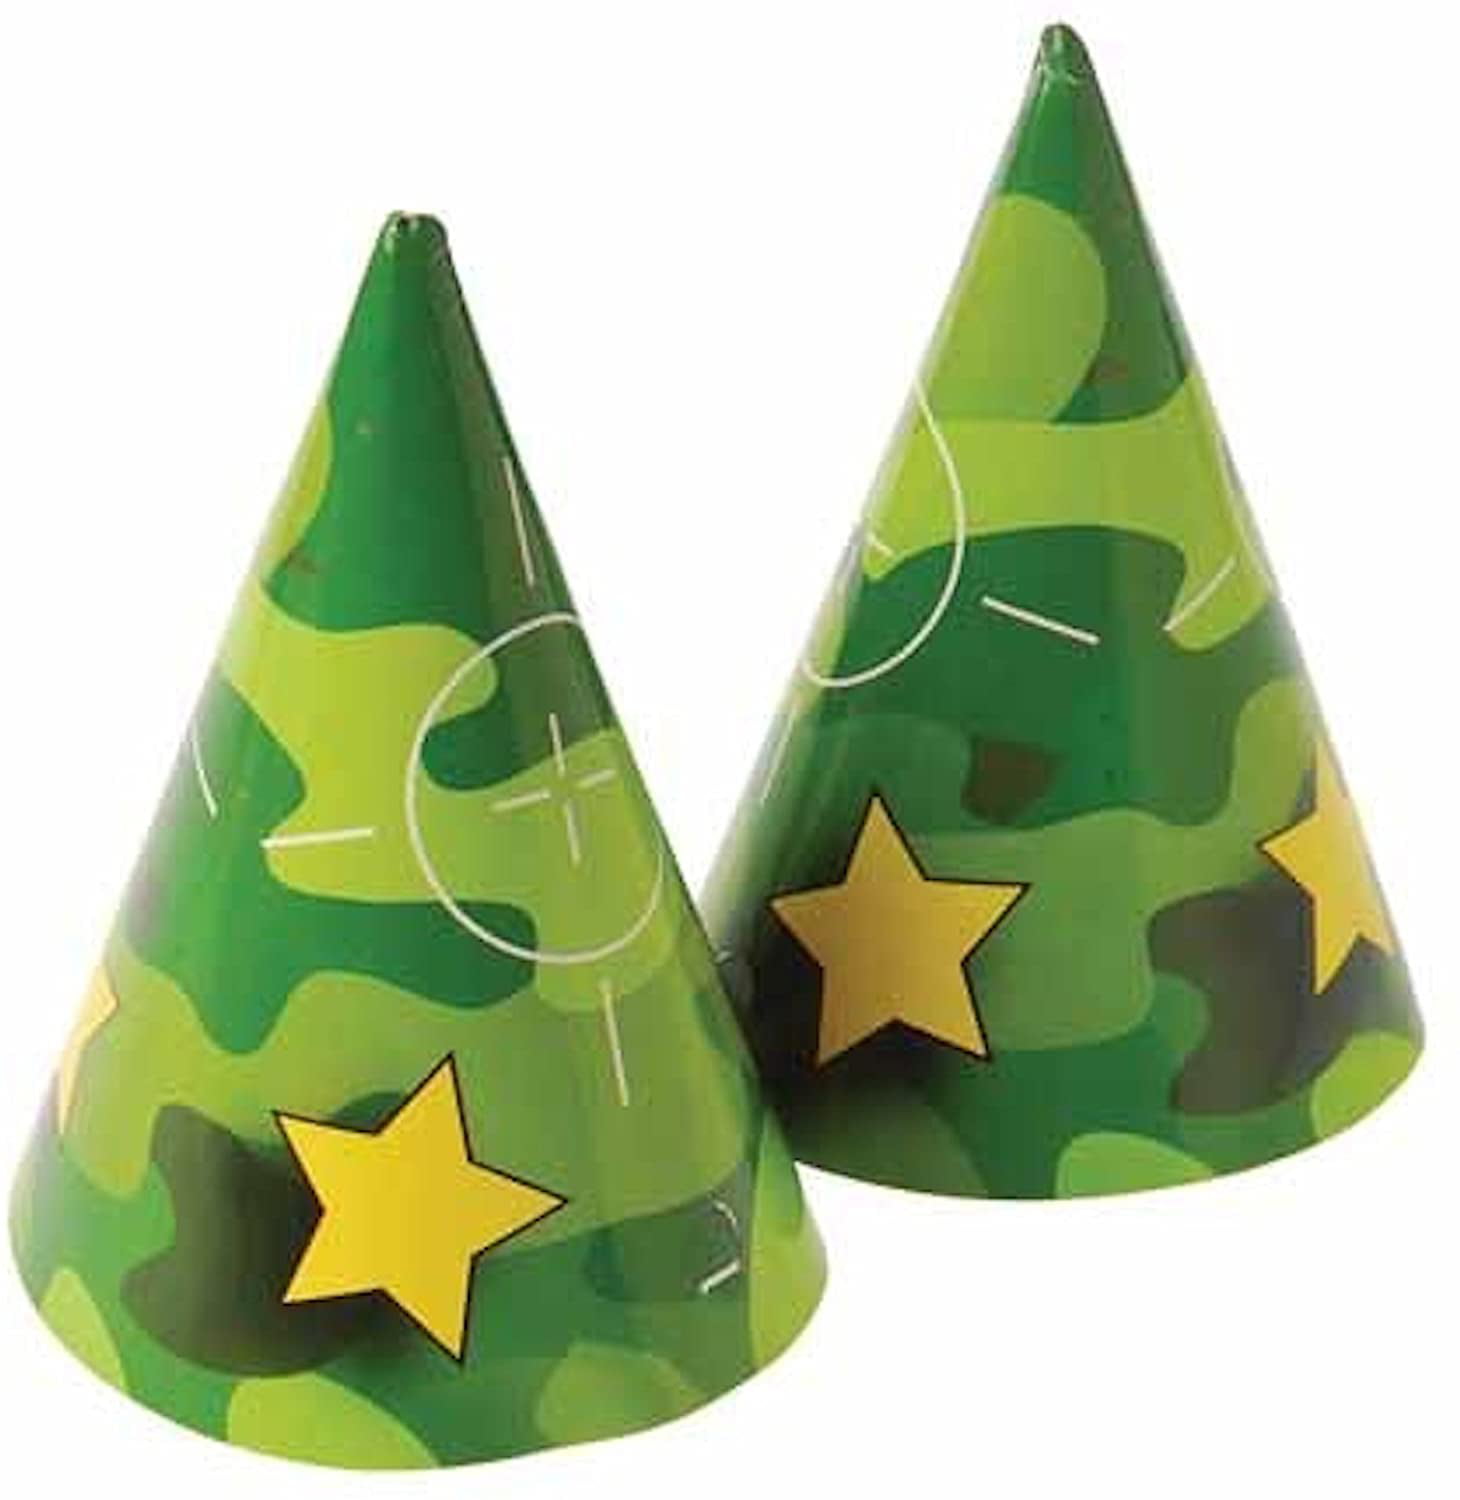 American Greetings Camouflage Party Visors 8 Ct for sale online